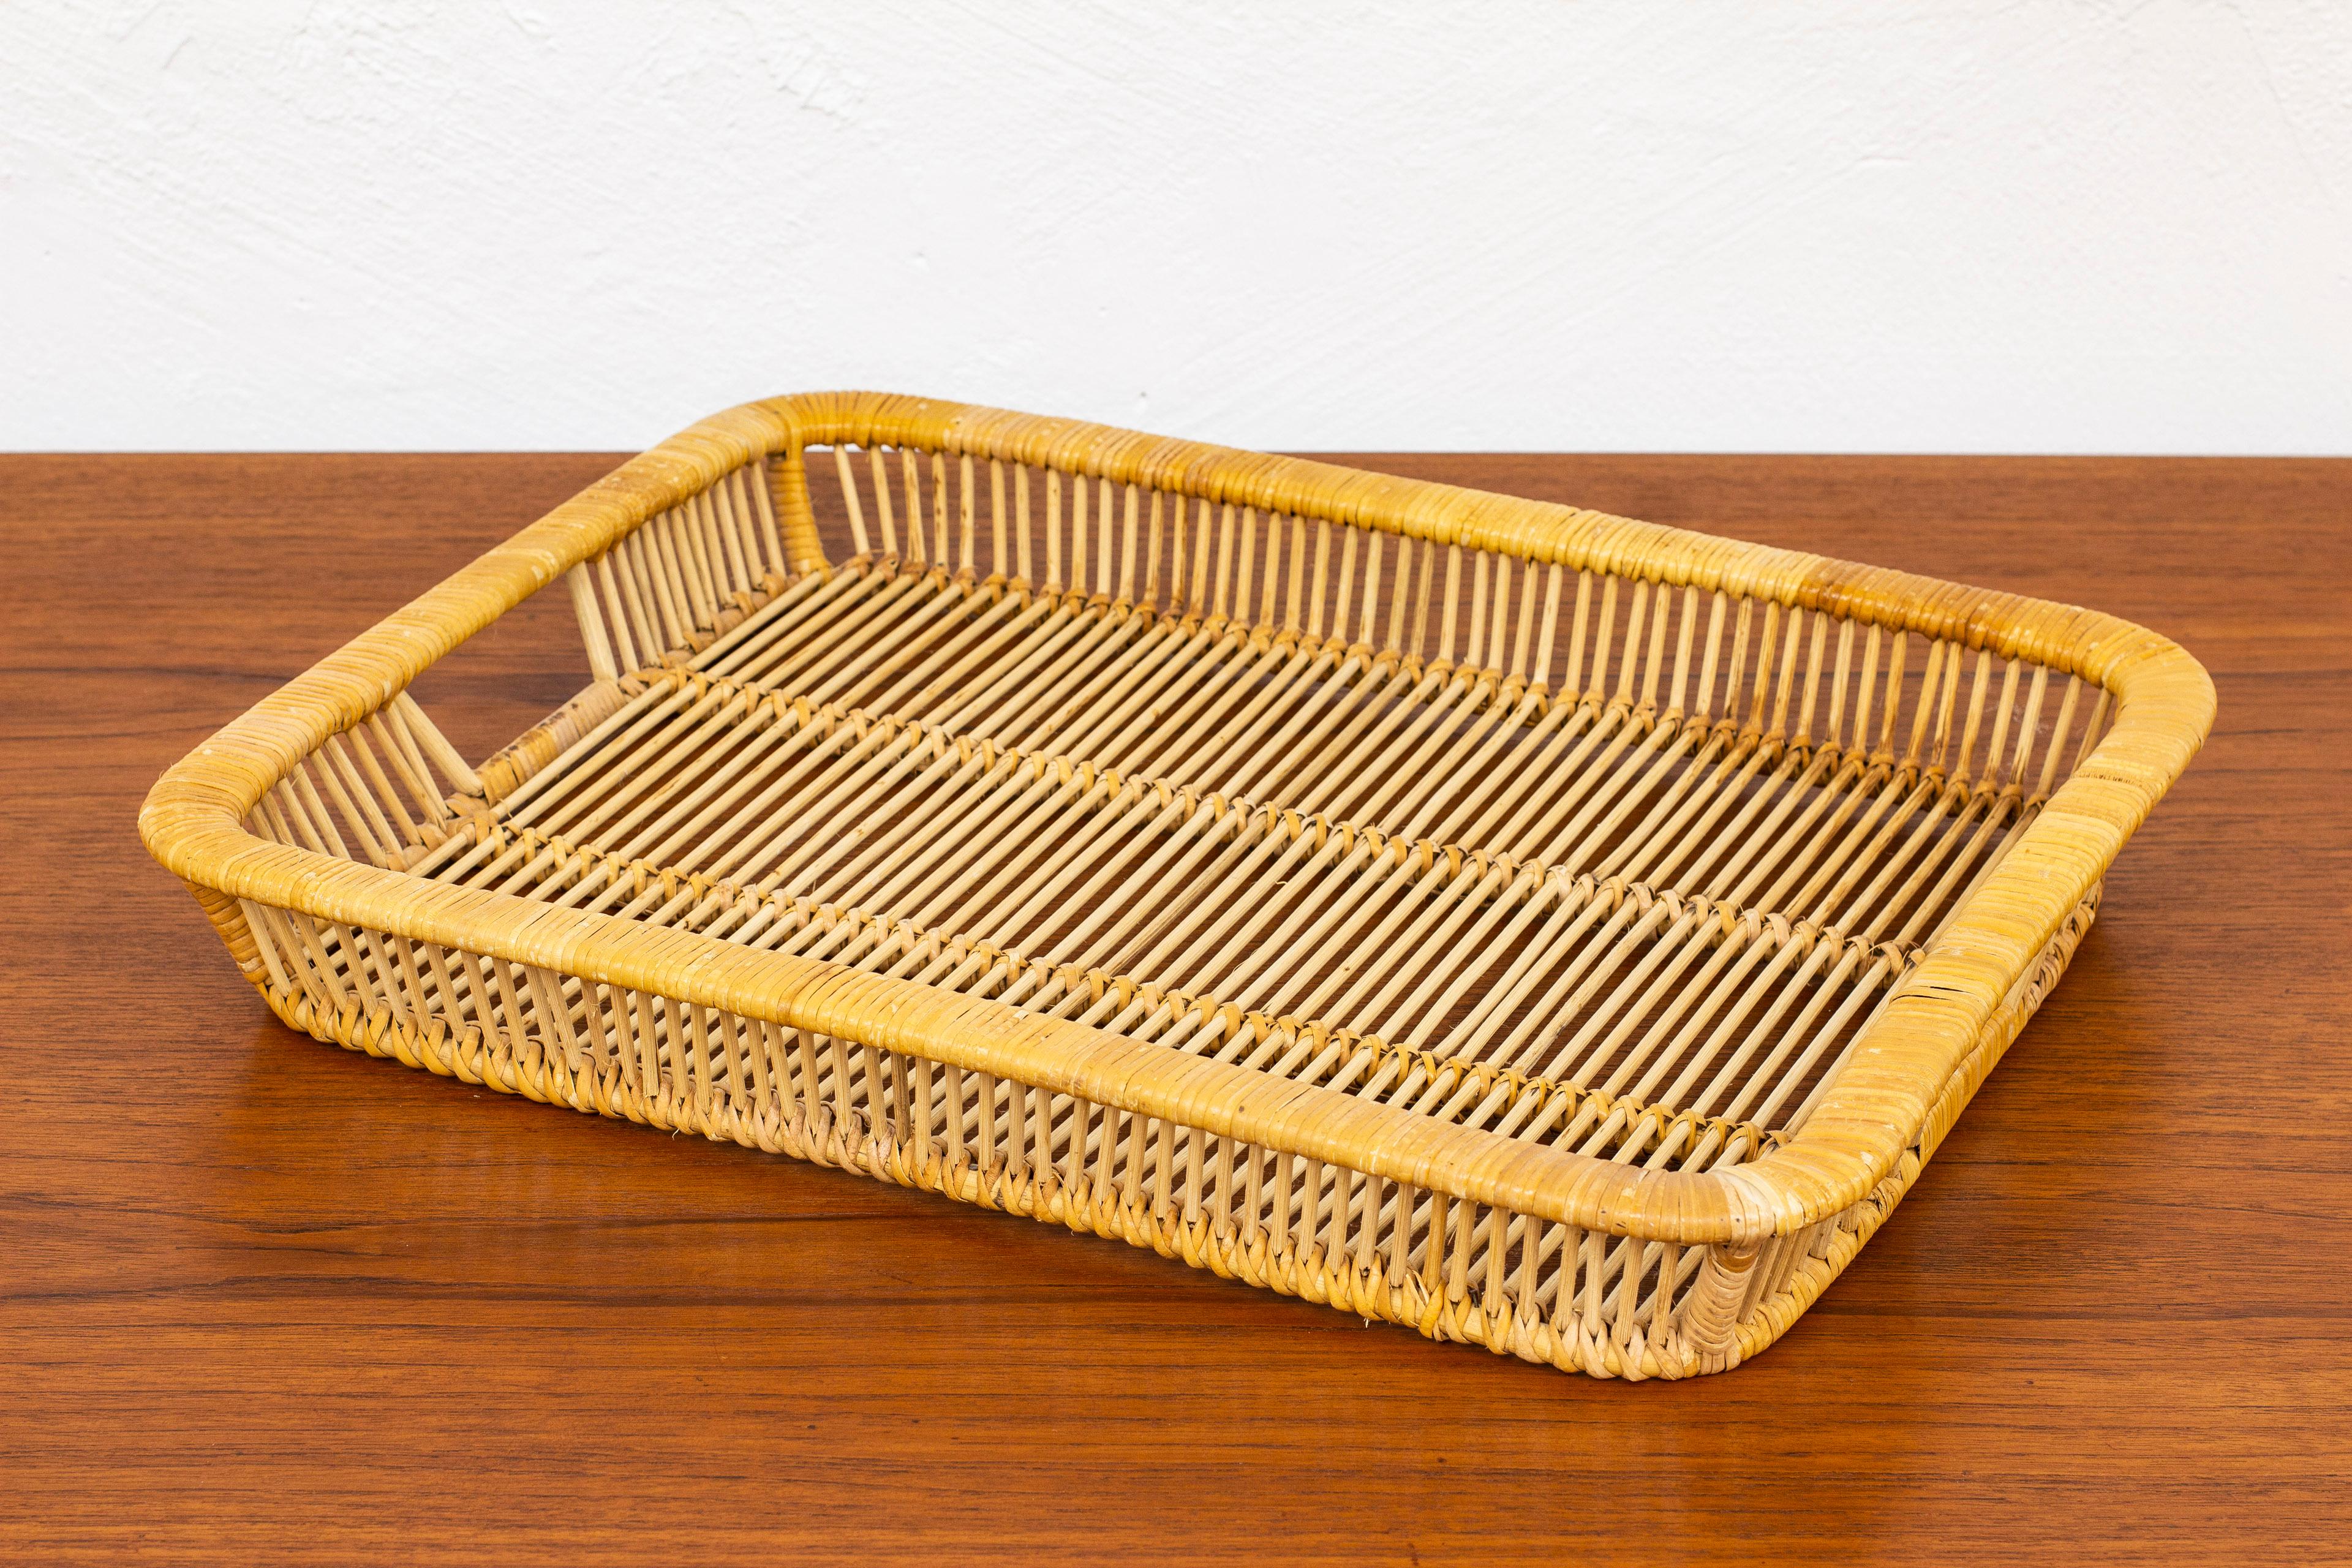 Rattan tray designed and made by Artek in Finland during the 1960s. Hand woven from cane and rattan. Good vintage condition with signs of age related wear and patina.

these beautifully crafted trays where designed, produced and sold through